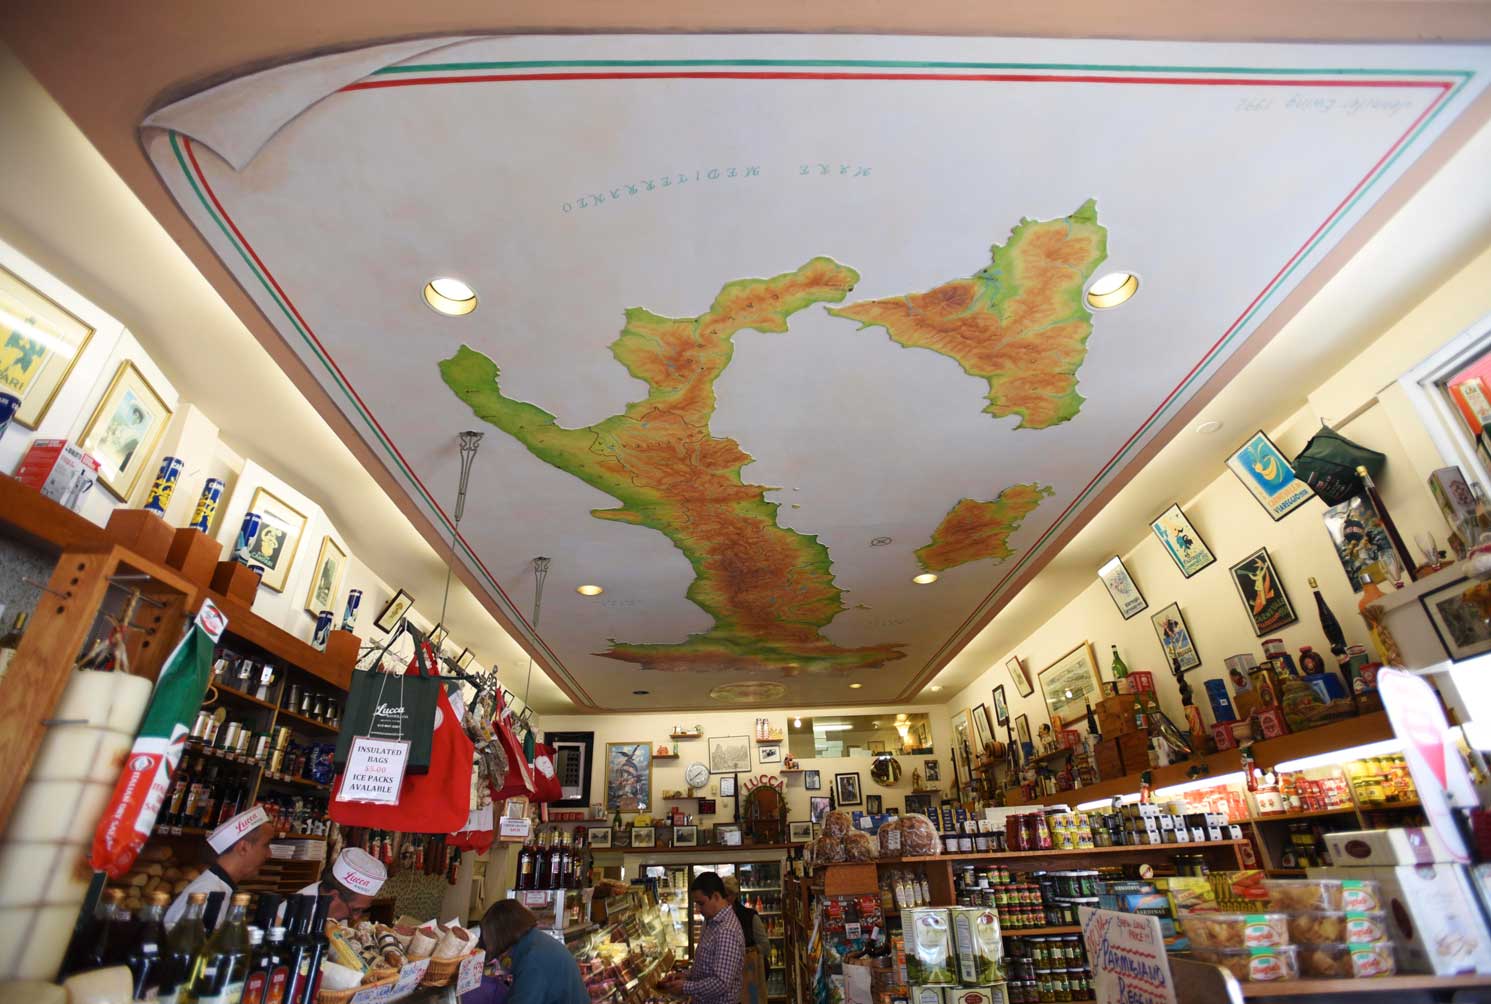 The mural on the ceiling welcomes you into the shop